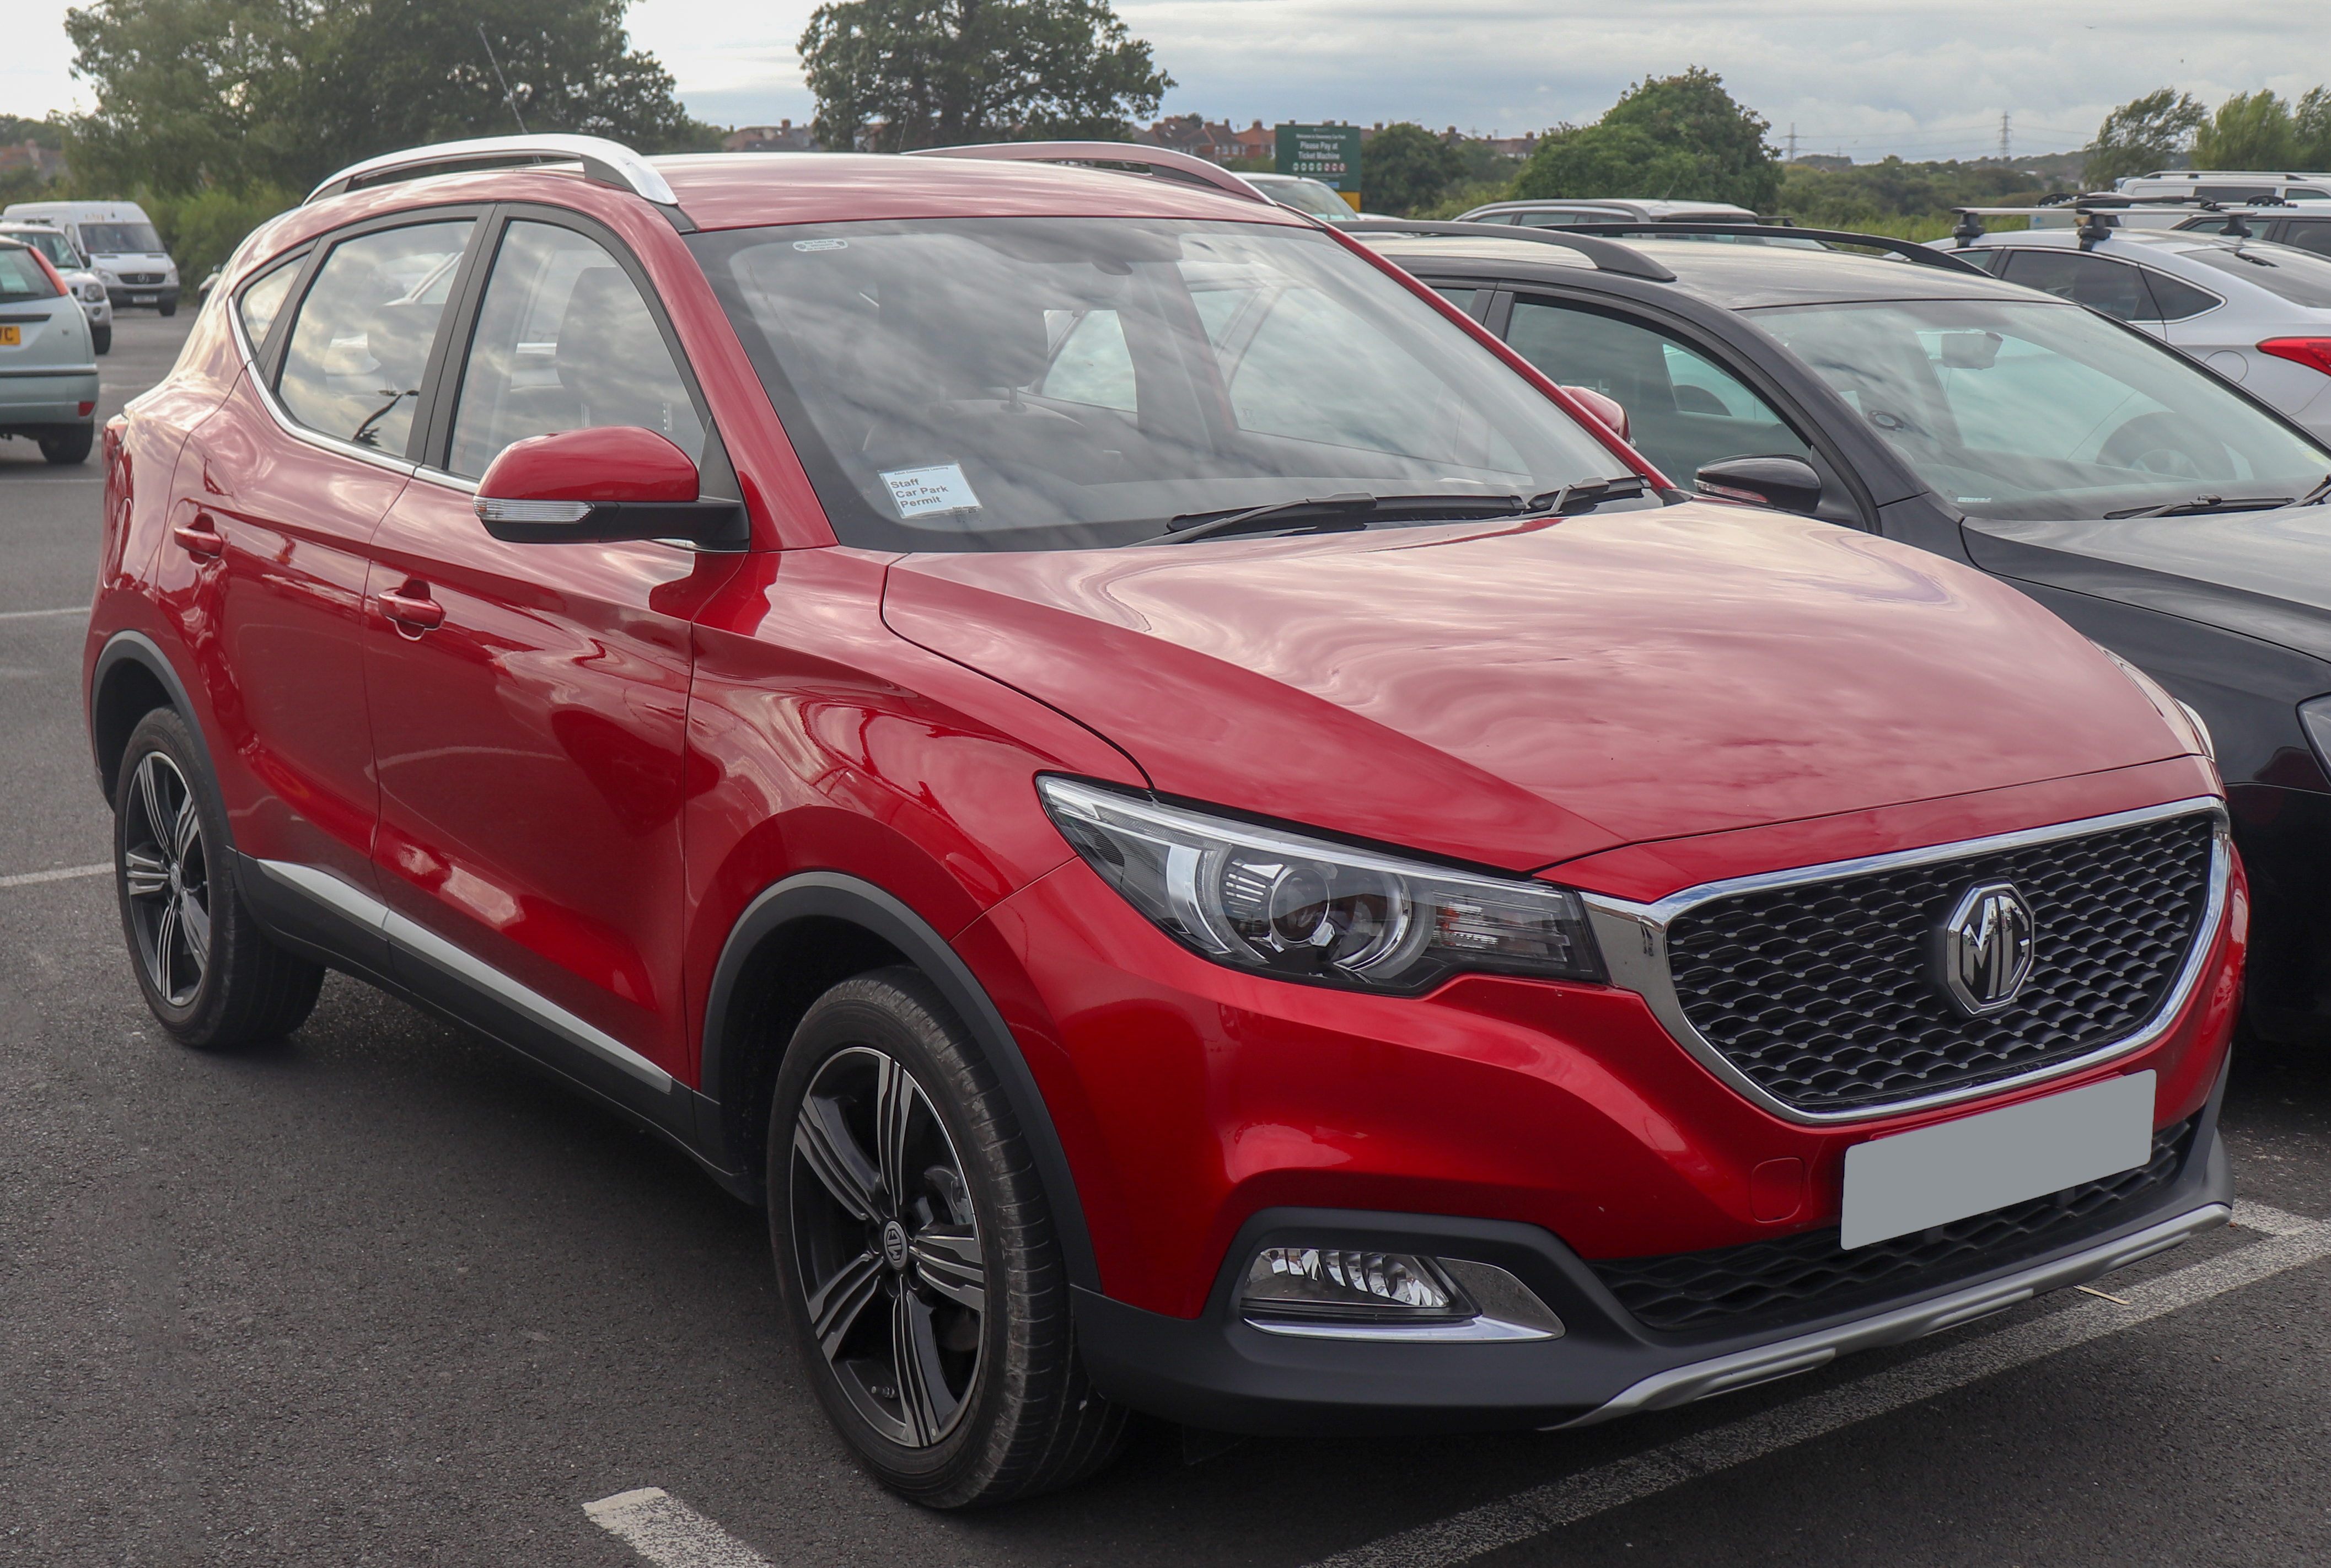 file:2018 mg zs exclusive 1.5 front.jpg - wikimedia commons